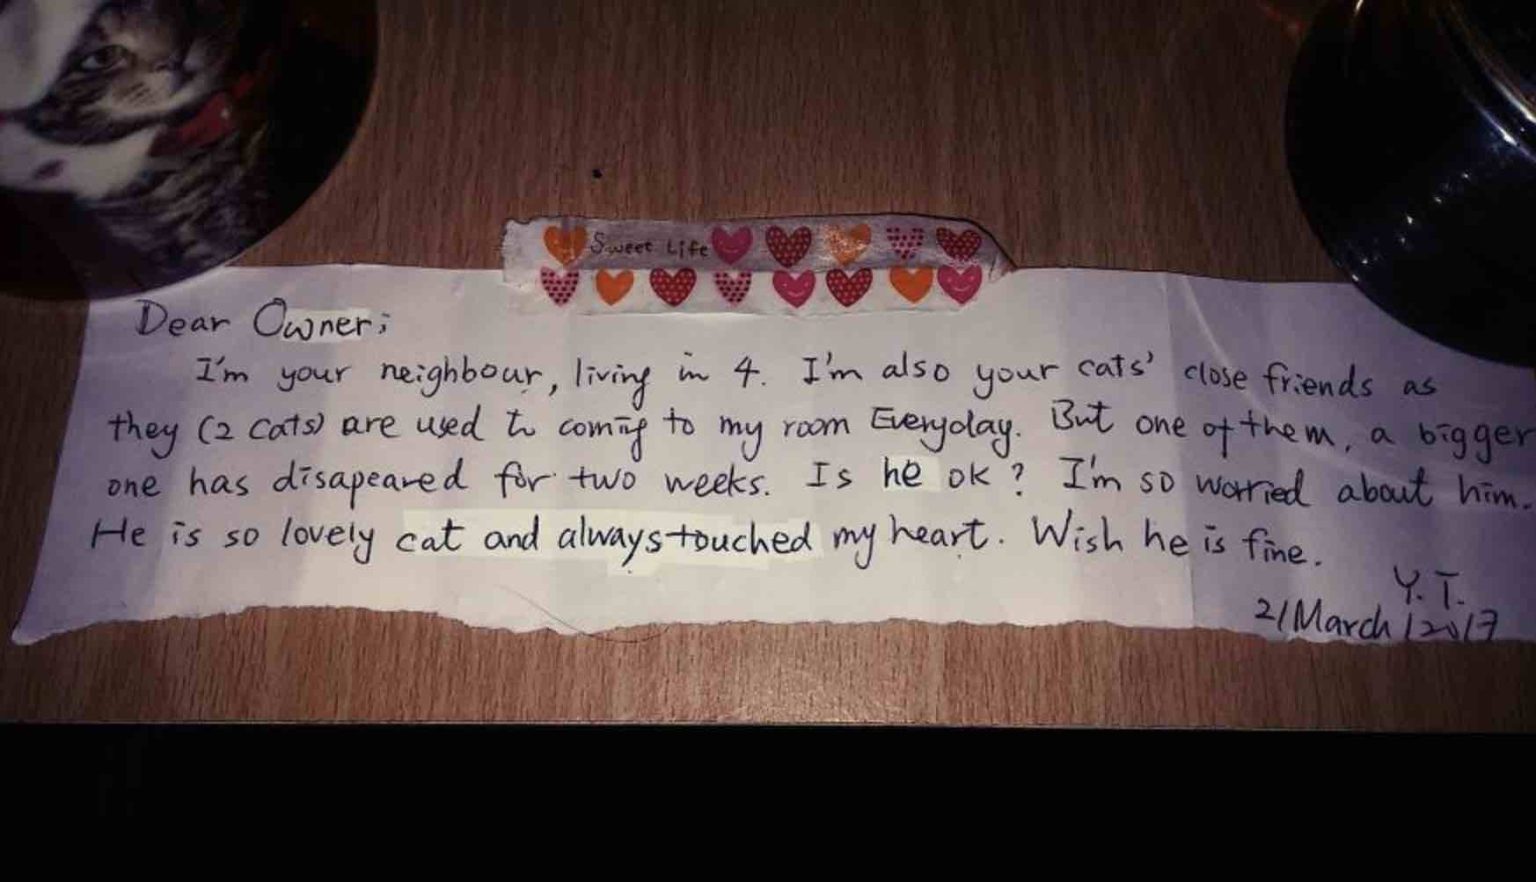 Heartbroken After the Loss of Their Cat, This Couple Received a ...